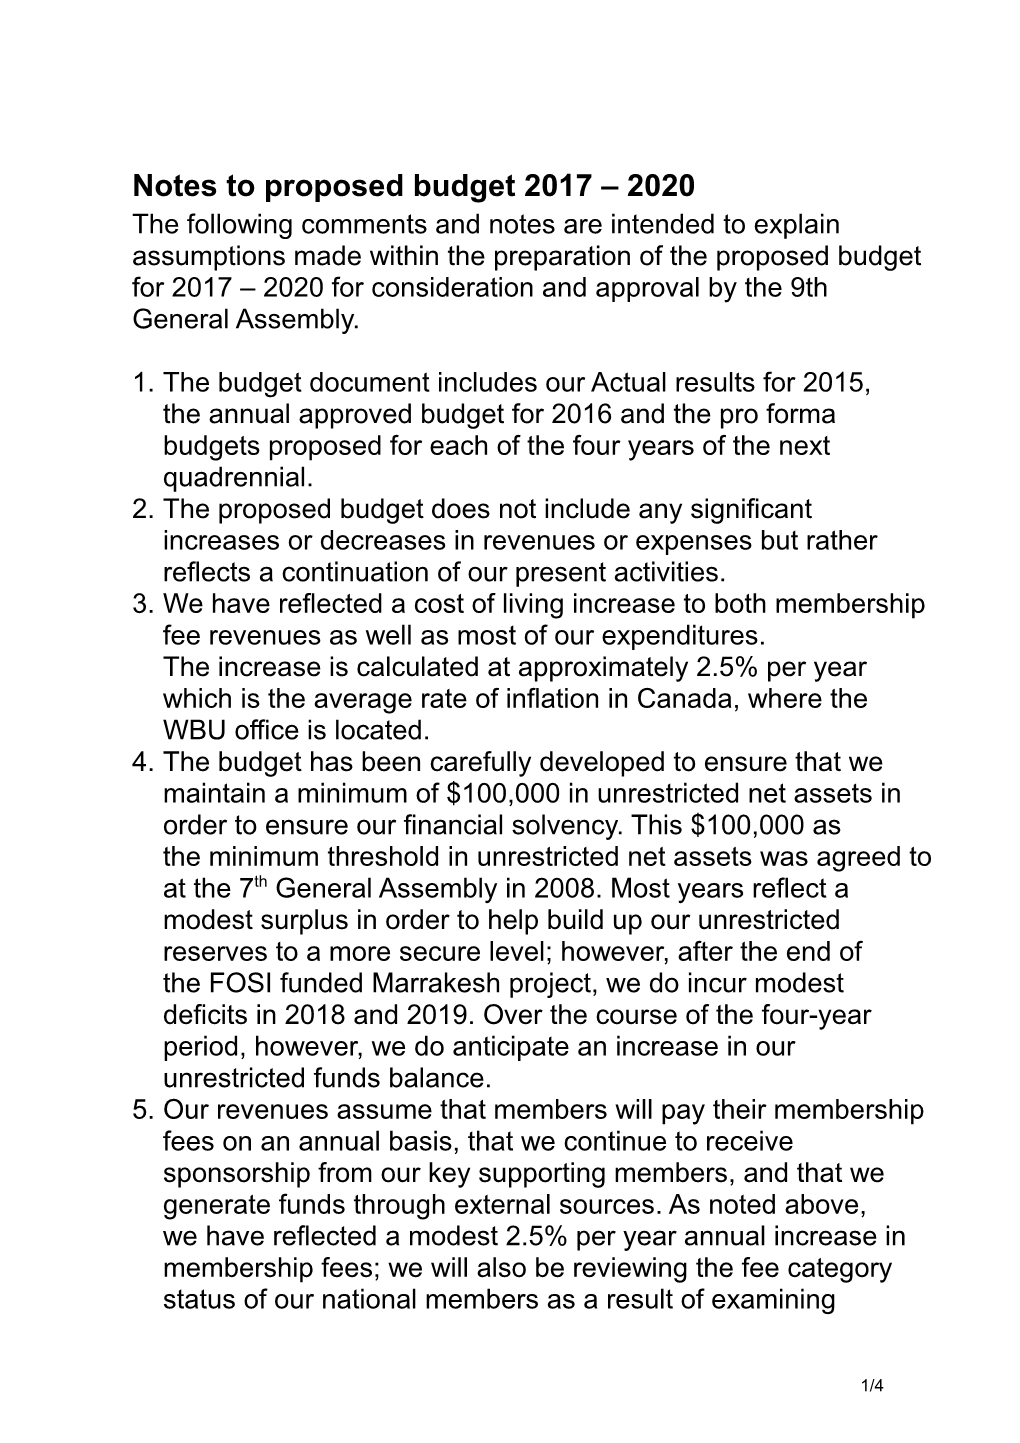 Notes to Proposed Budget 2009 2020